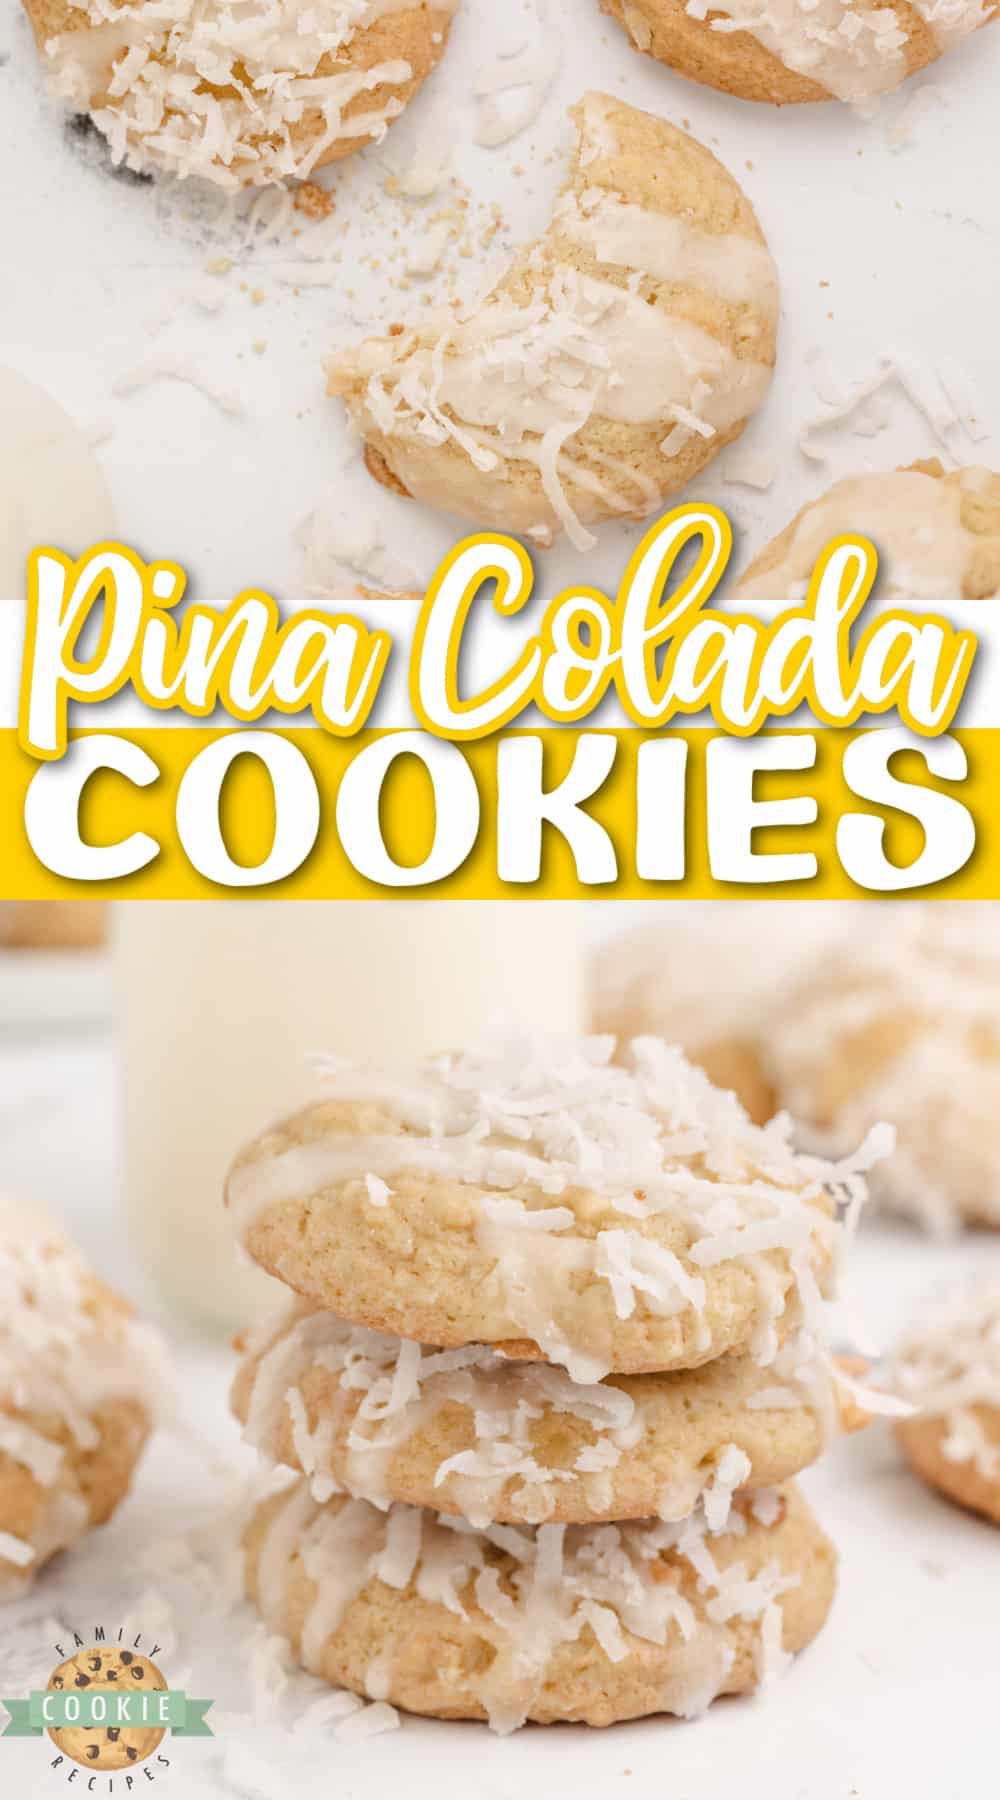 Pina Colada Cookies are soft, chewy, and packed with pineapple and coconut. This tropical cookie recipe is so easy to make and everyone loves these delicious cookies!